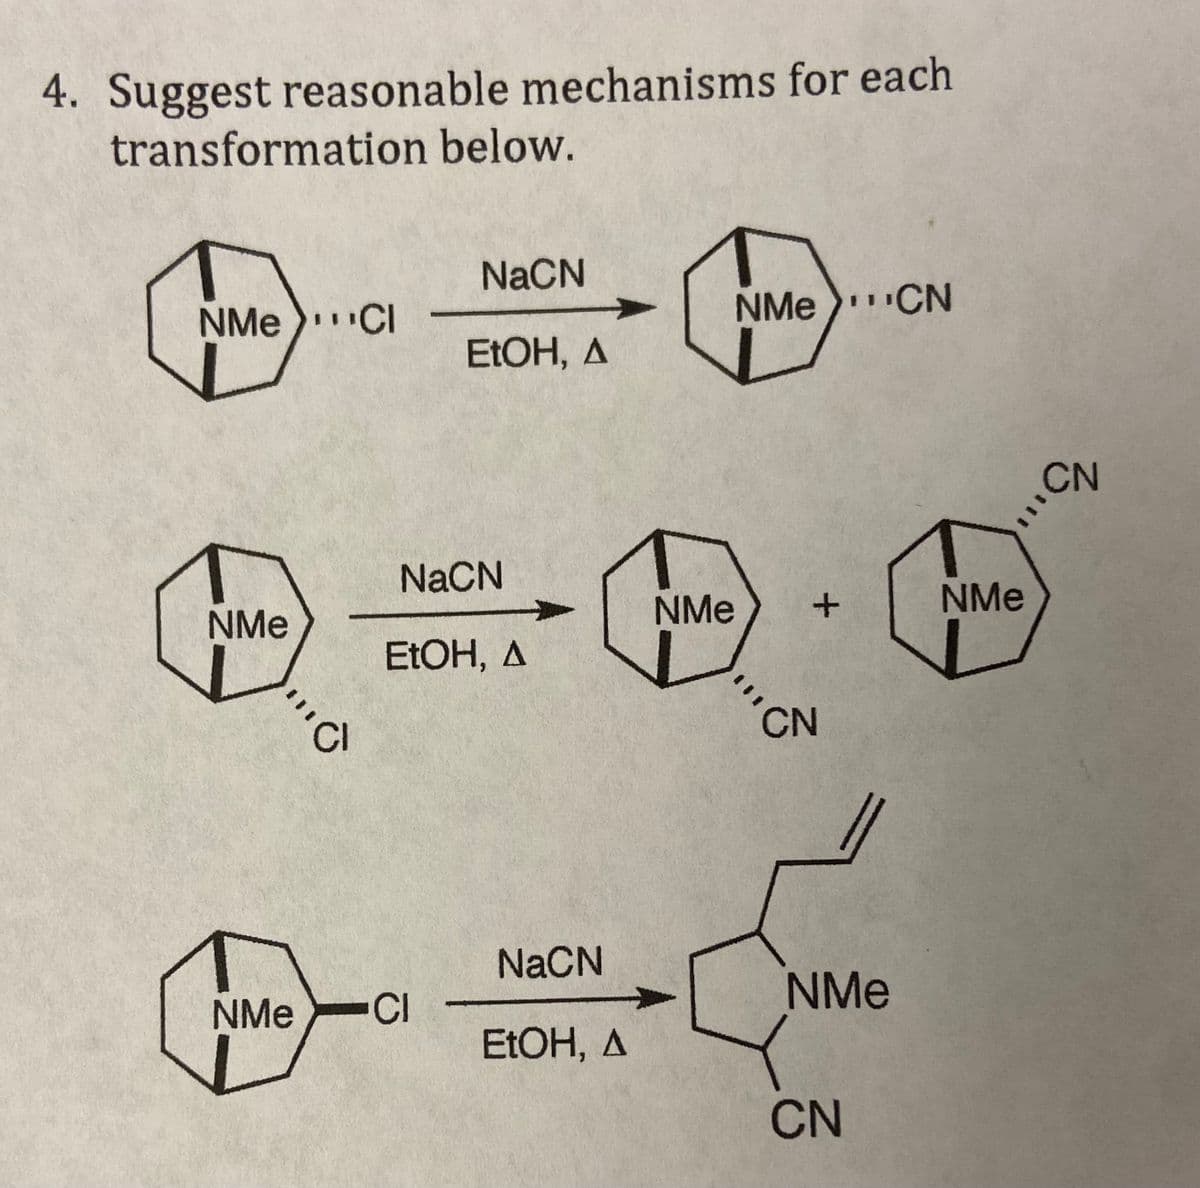 4. Suggest reasonable mechanisms for each
transformation below.
NMe Cl
NMe
Cl
NaCN
EtOH, A
NaCN
EtOH, A
NMe CI
NaCN
EtOH, A
NMe
NMe CN
+
CN
NMe
CN
NMe
CN